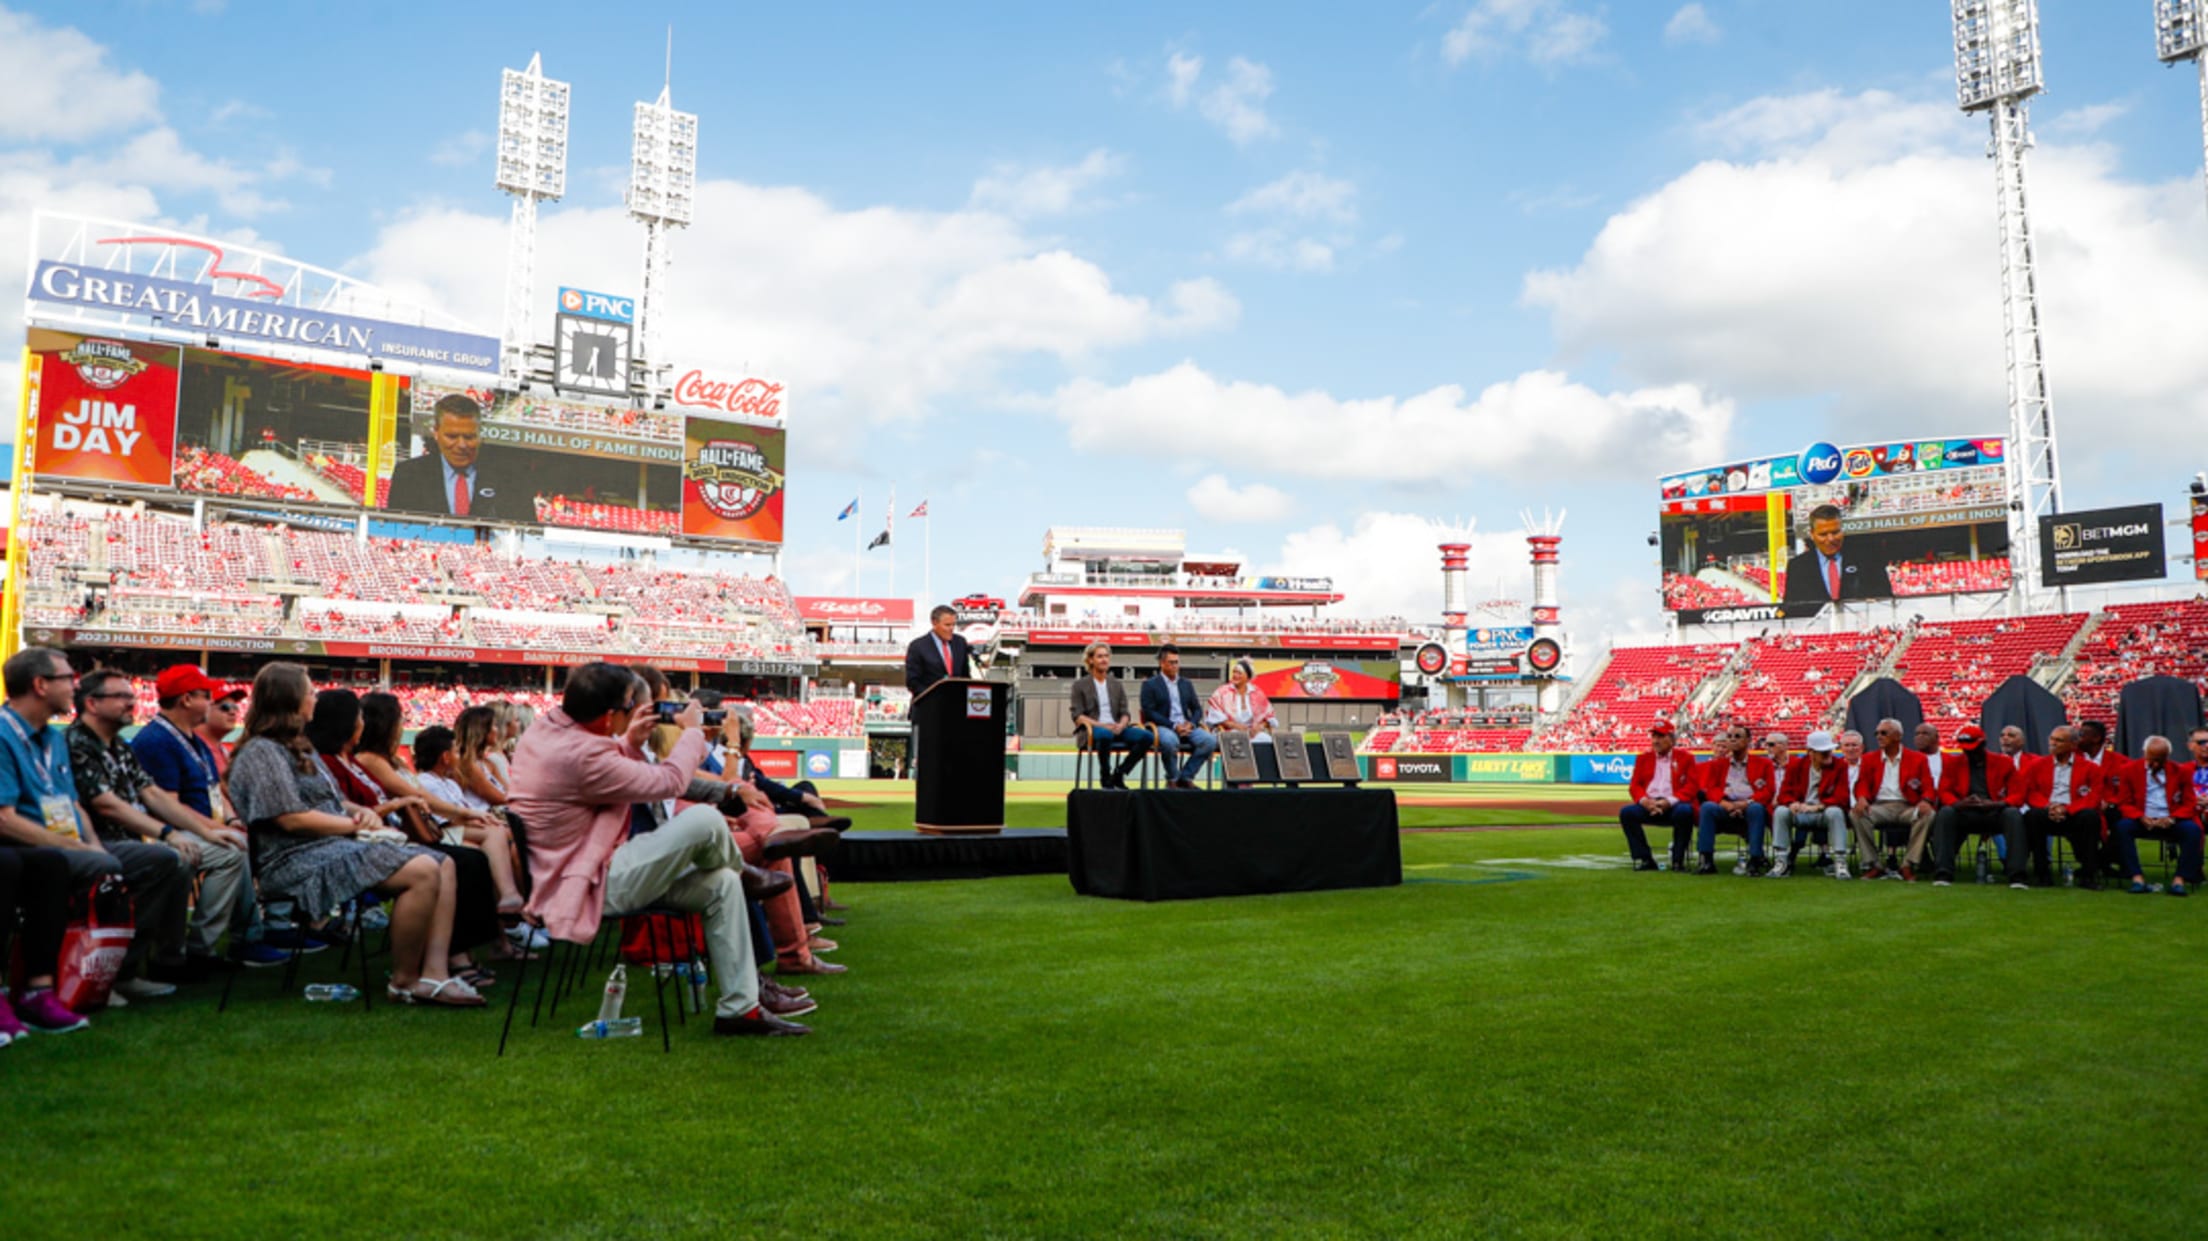 Cincinnati Reds Hall of Fame gets 3 new inductees